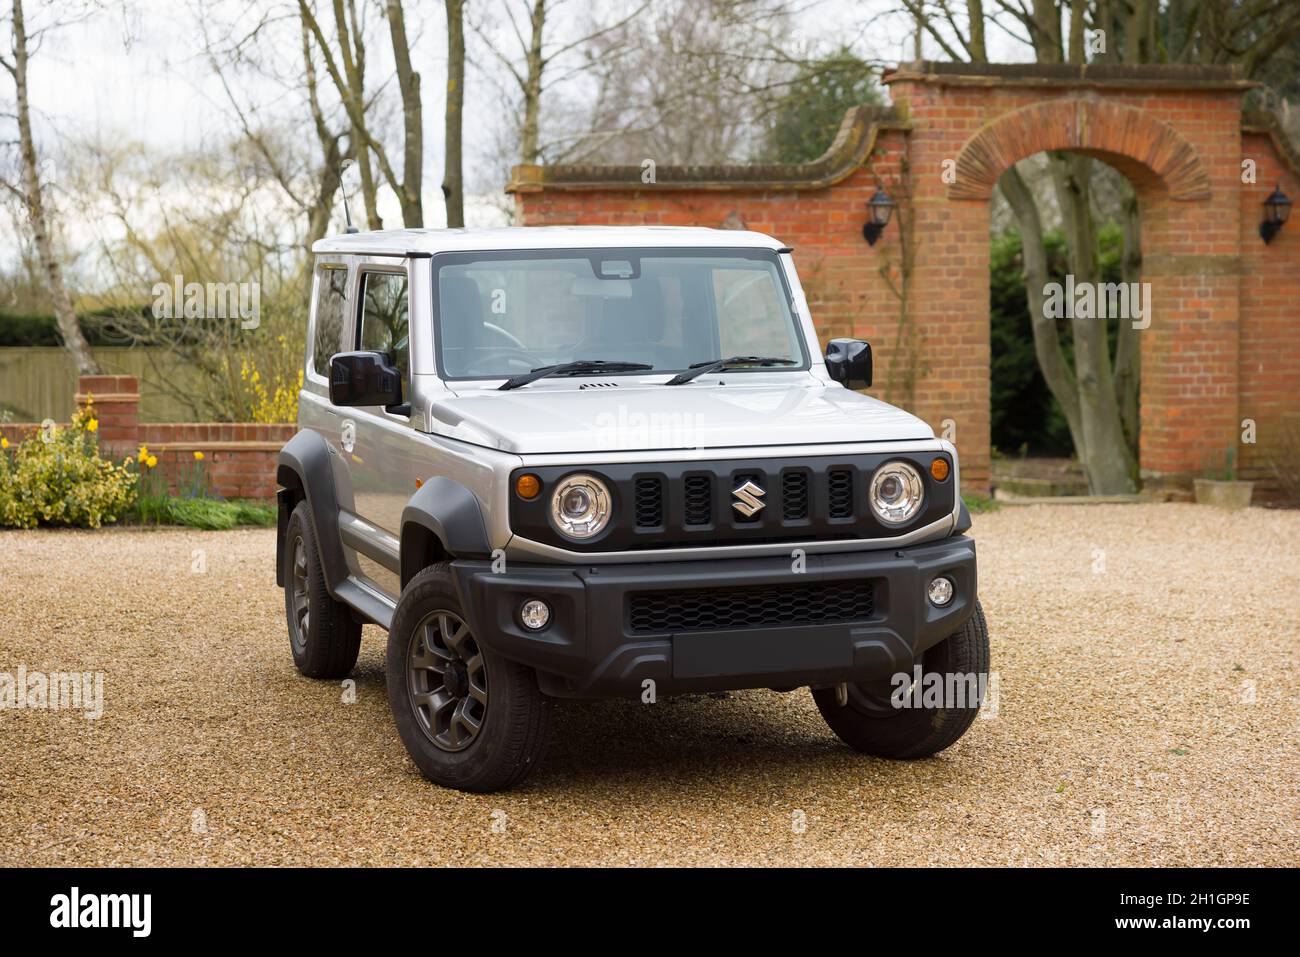 BUCKINGHAMSHIRE, UK - March 19, 2021. Suzuki Jimny 2018, parked in rural England. Fourth generation of the small off-road mini SUV. Stock Photo